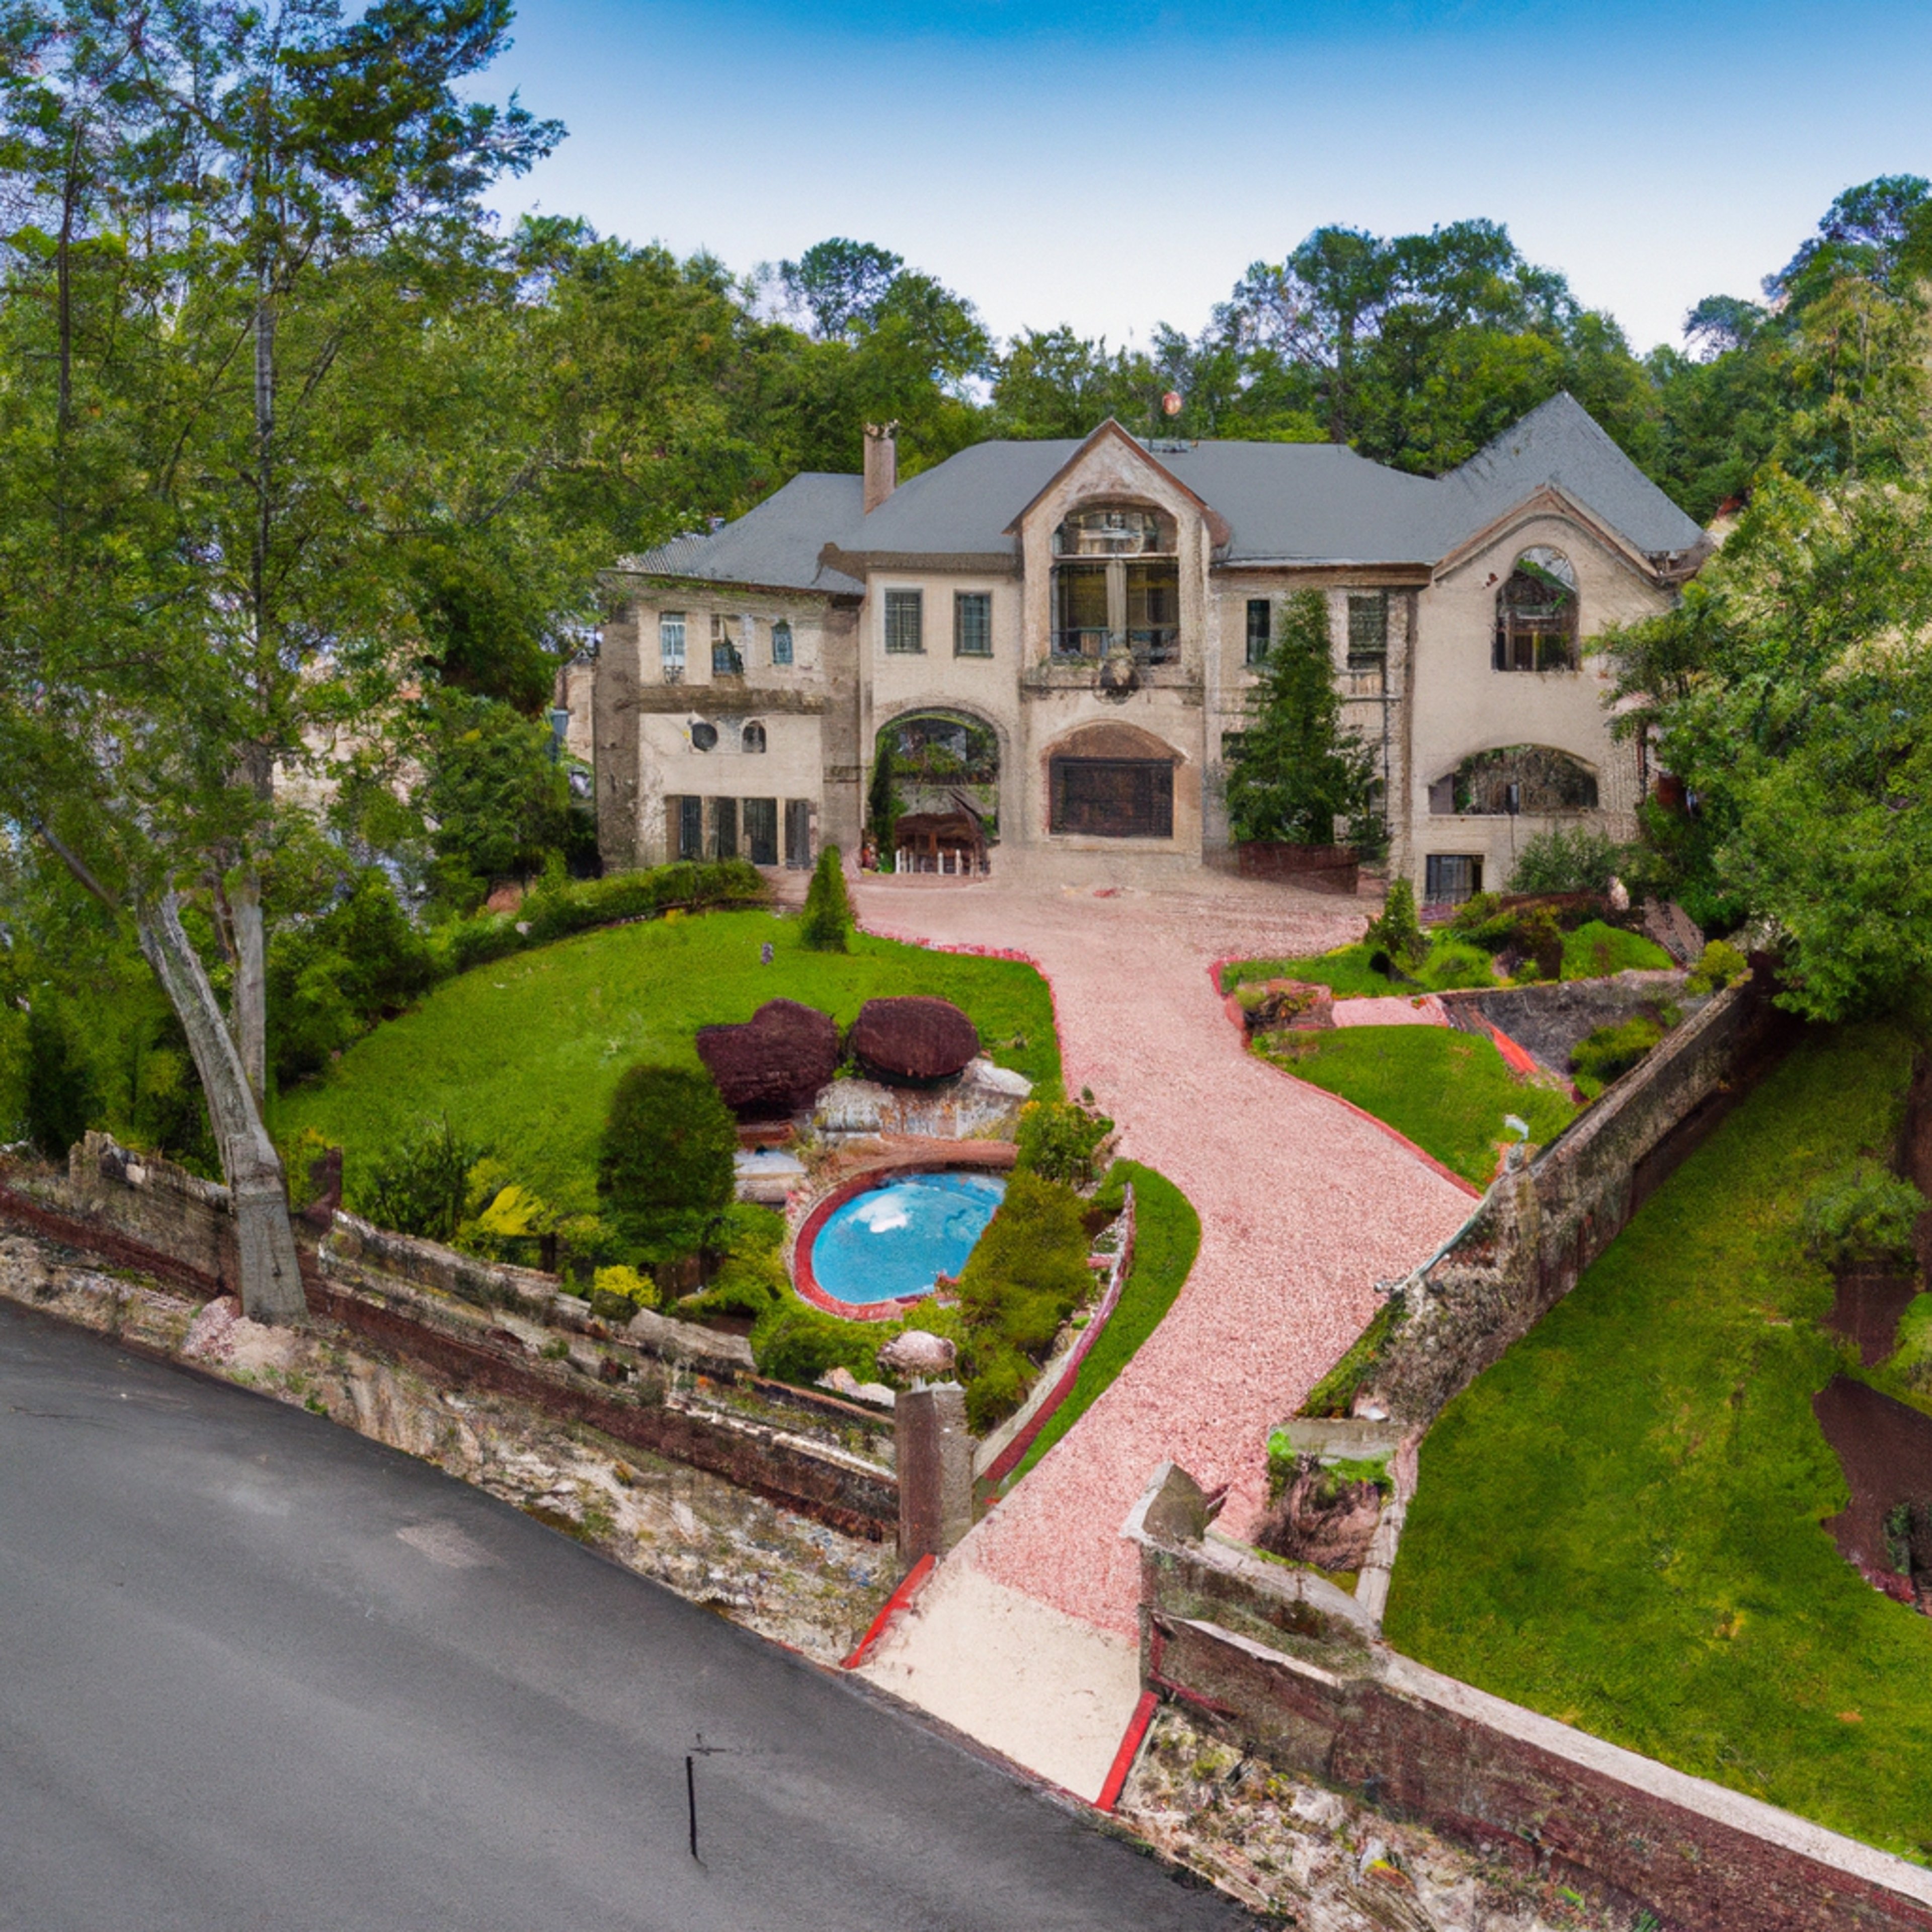 Bergen County House Sells for $3.1 Million in One of the Most Expensive Real Estate Sales